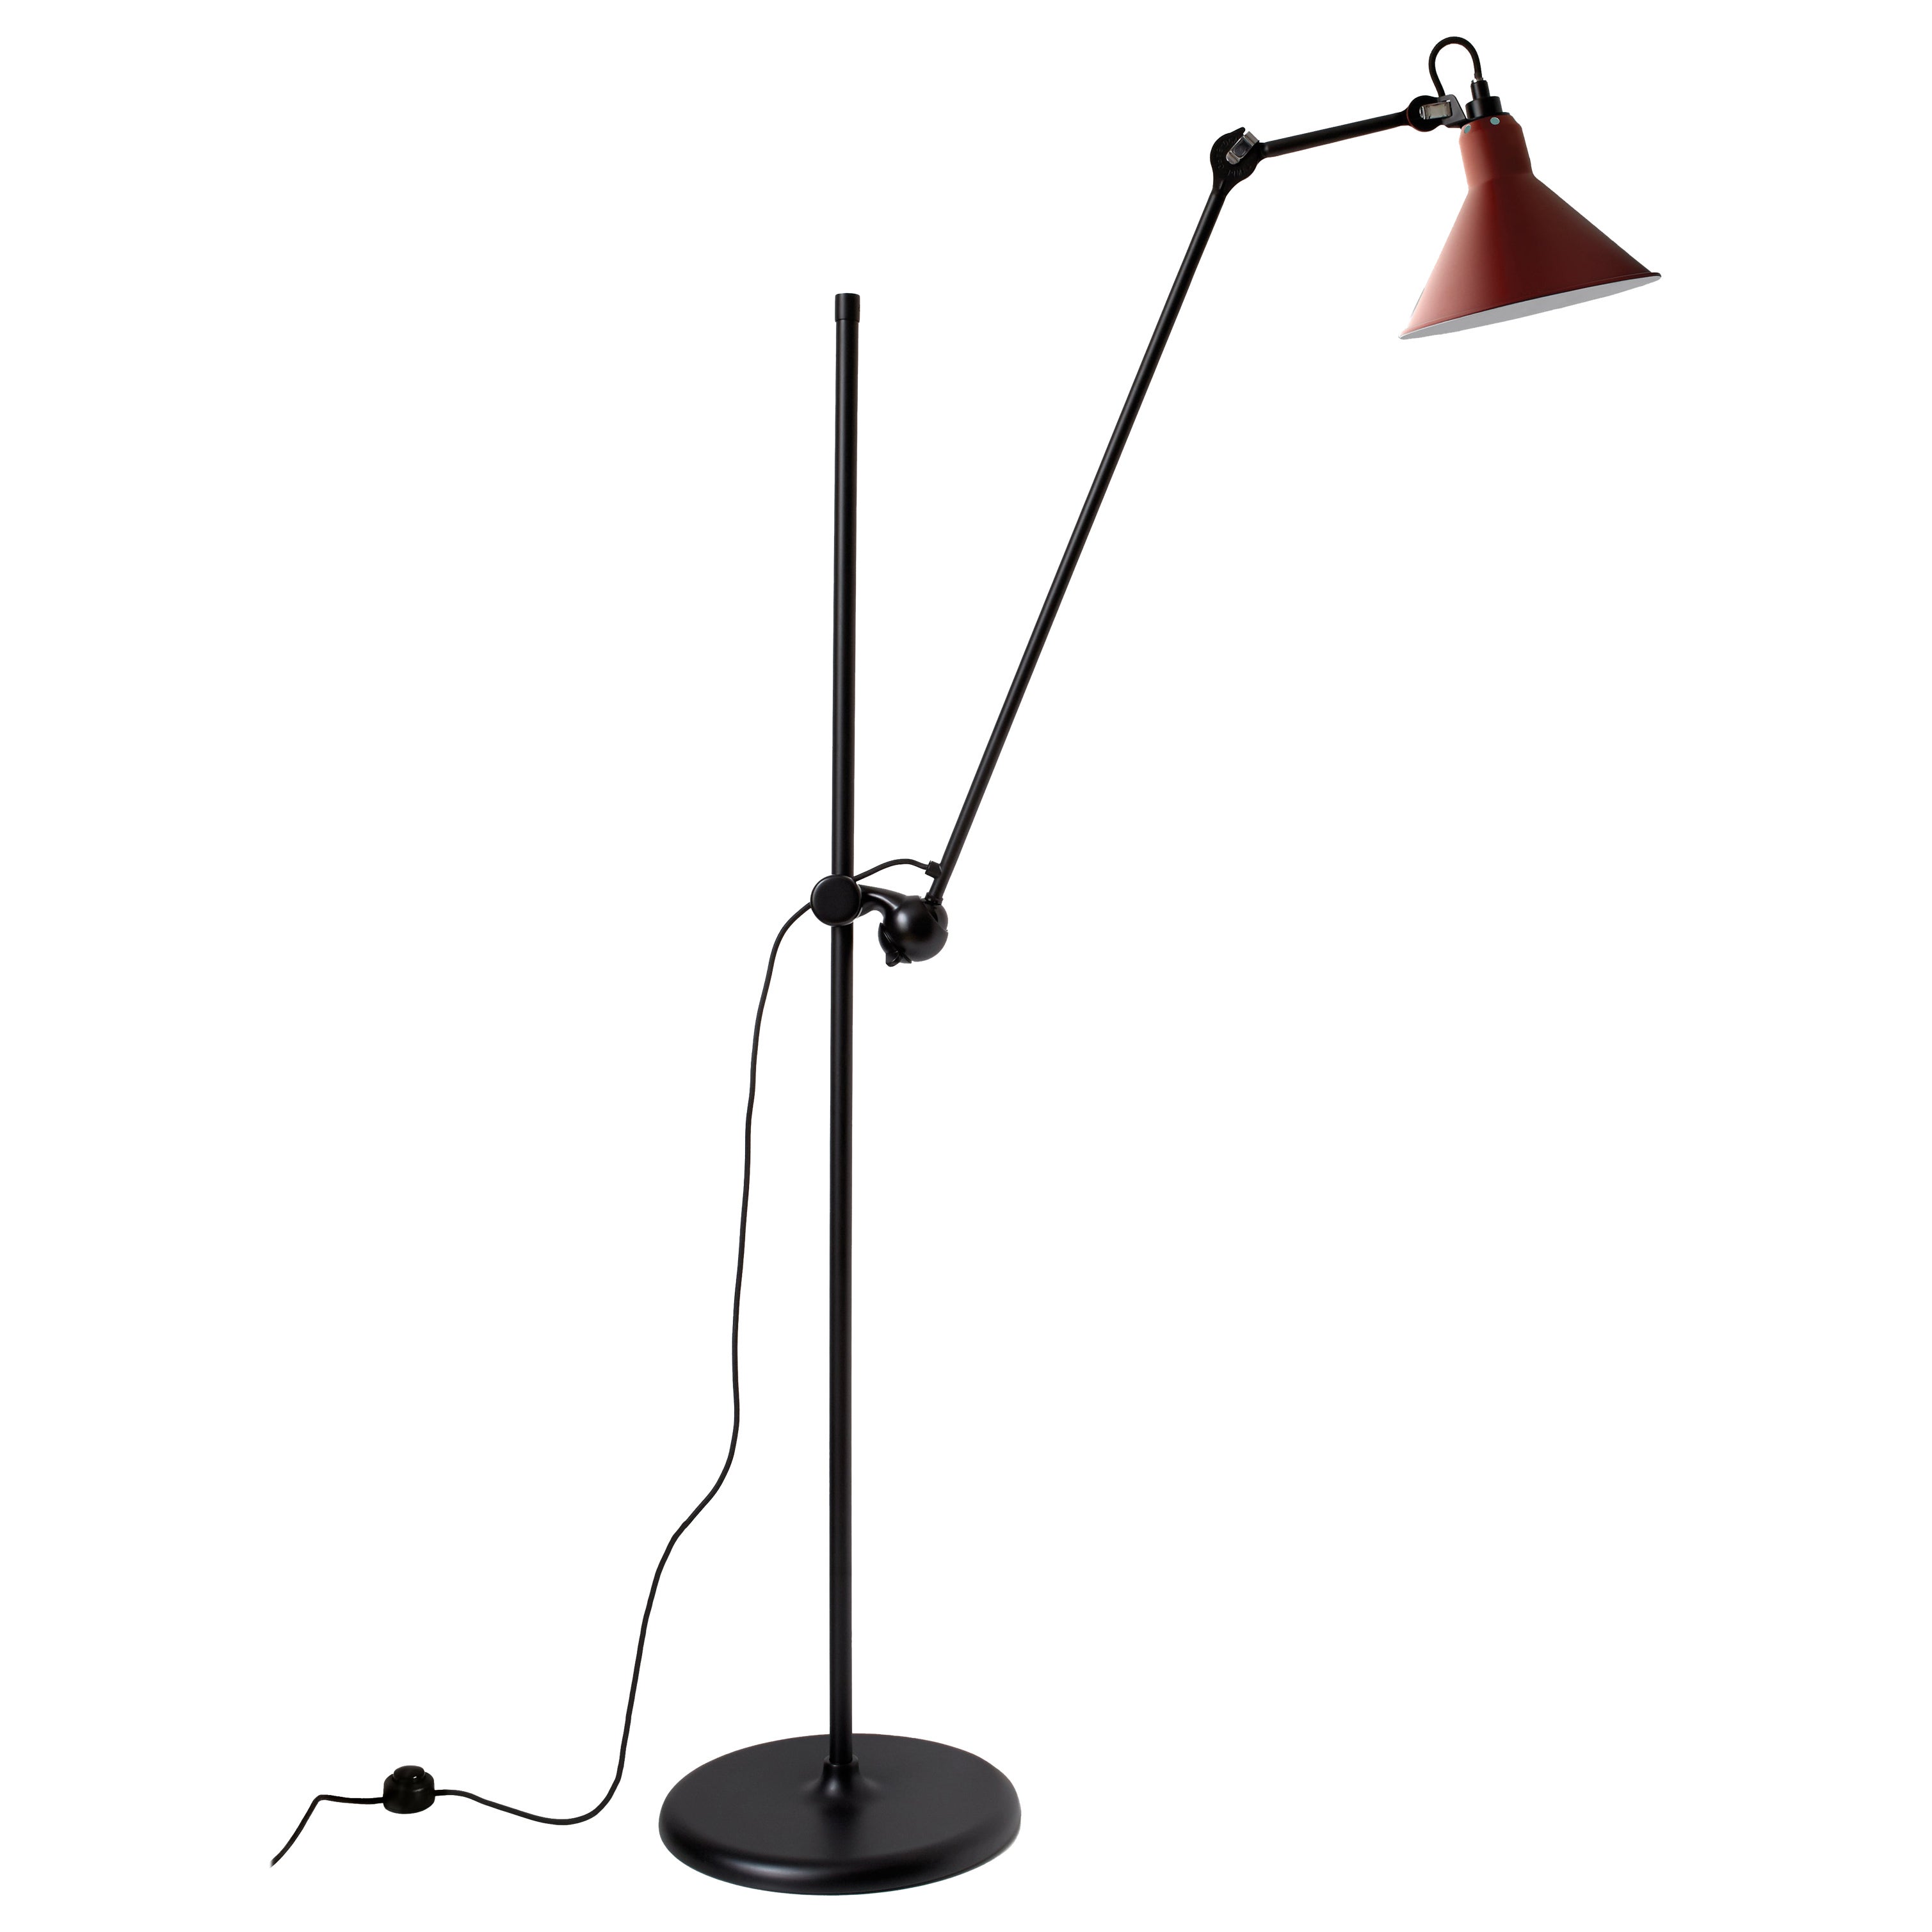 DCW Editions La Lampe Gras N°215 Floor Lamp in Black Arm and Red Shade For Sale